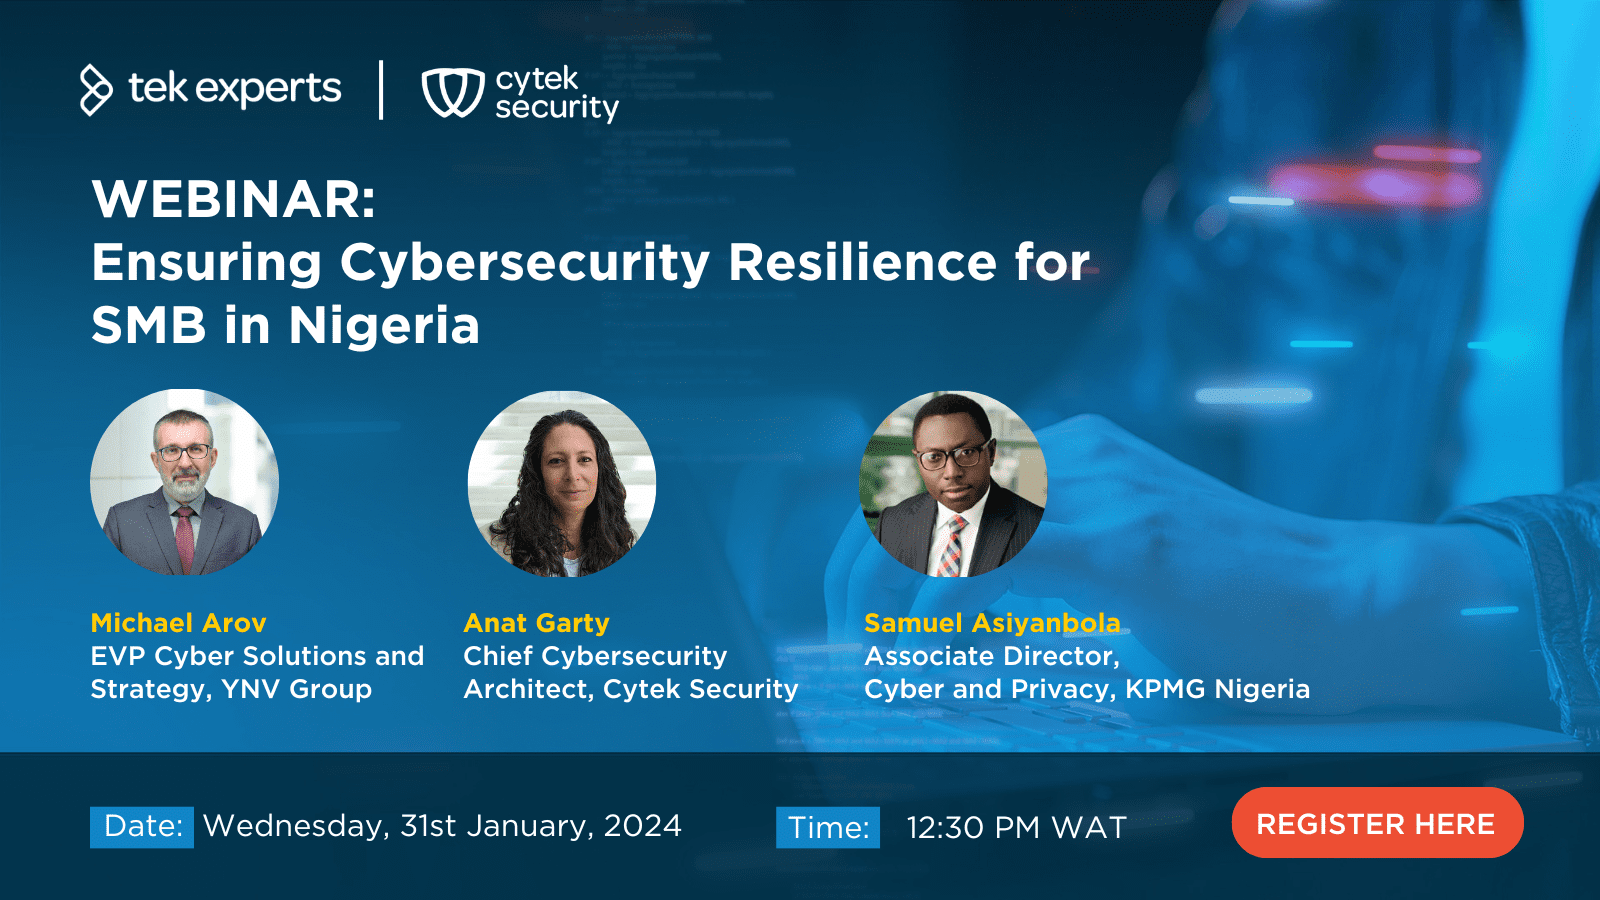 Webinar: Ensuring Cybersecurity Resilience for SMBs in Nigeria